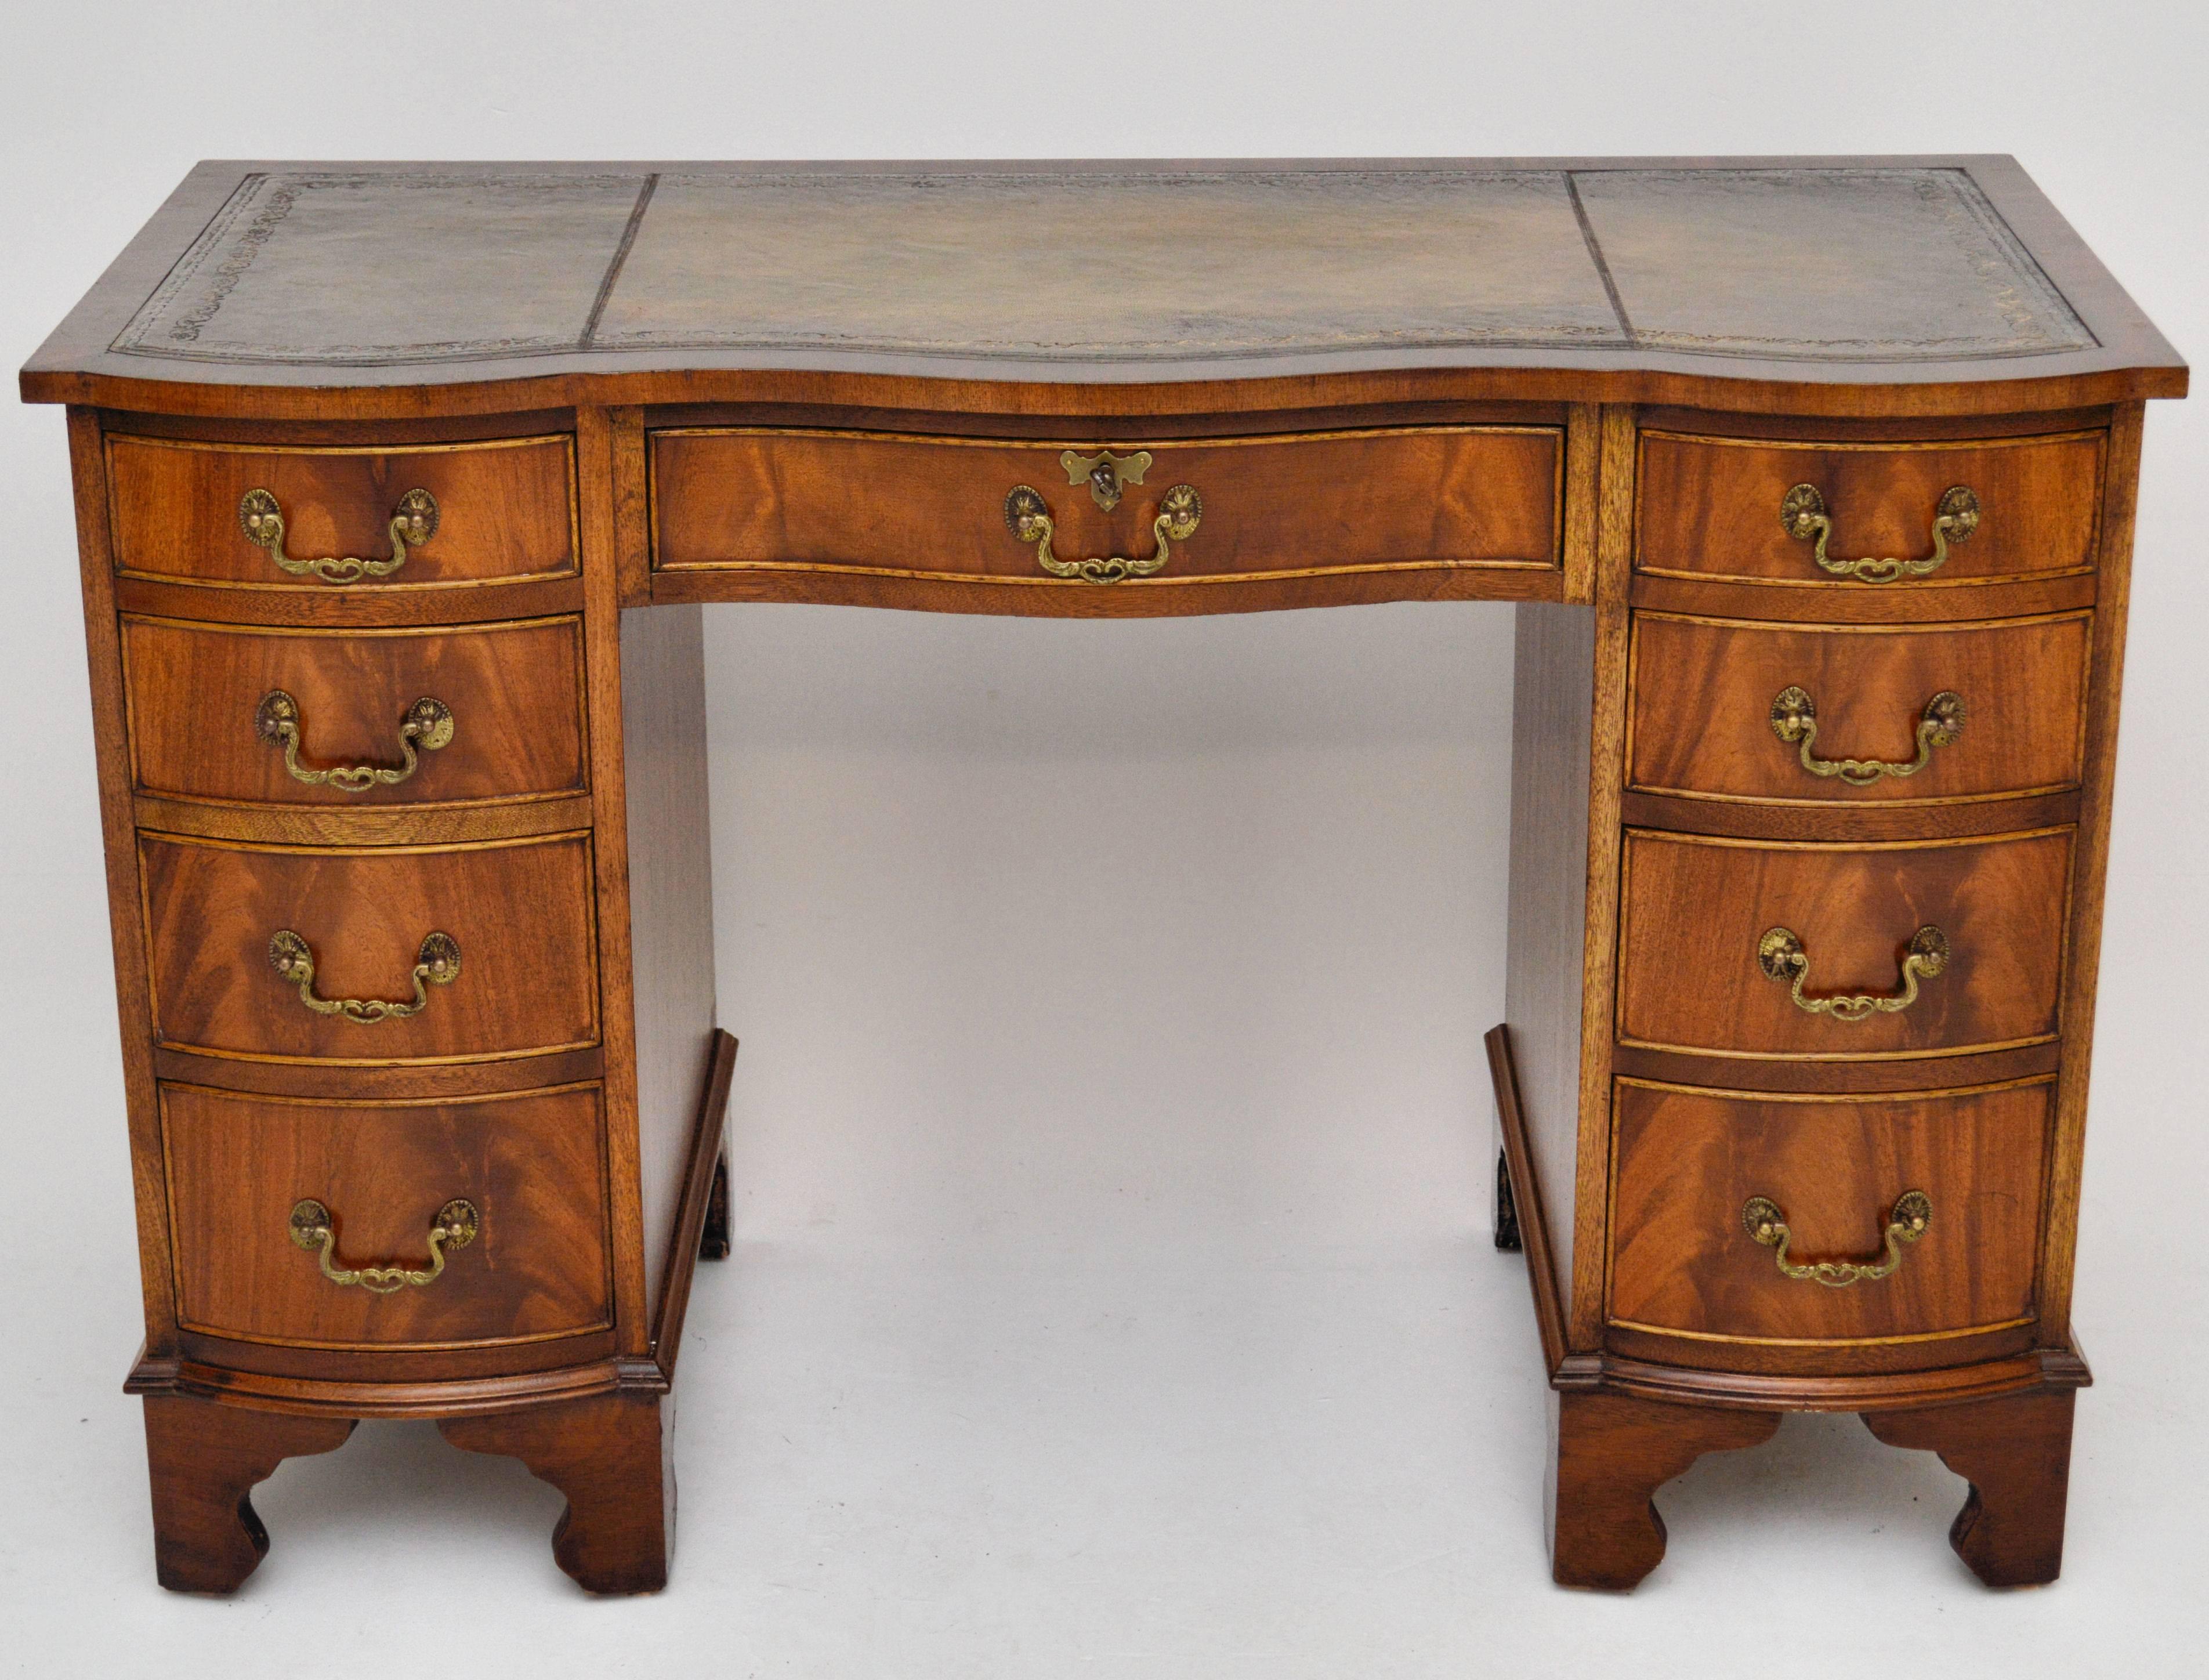 Good quality antique Georgian style flame mahogany desk, with a double serpentine shaped front and a polished flame mahogany back. It has a lovely faded green tooled leather writing surface, one-drawer in the middle and four more either side of the